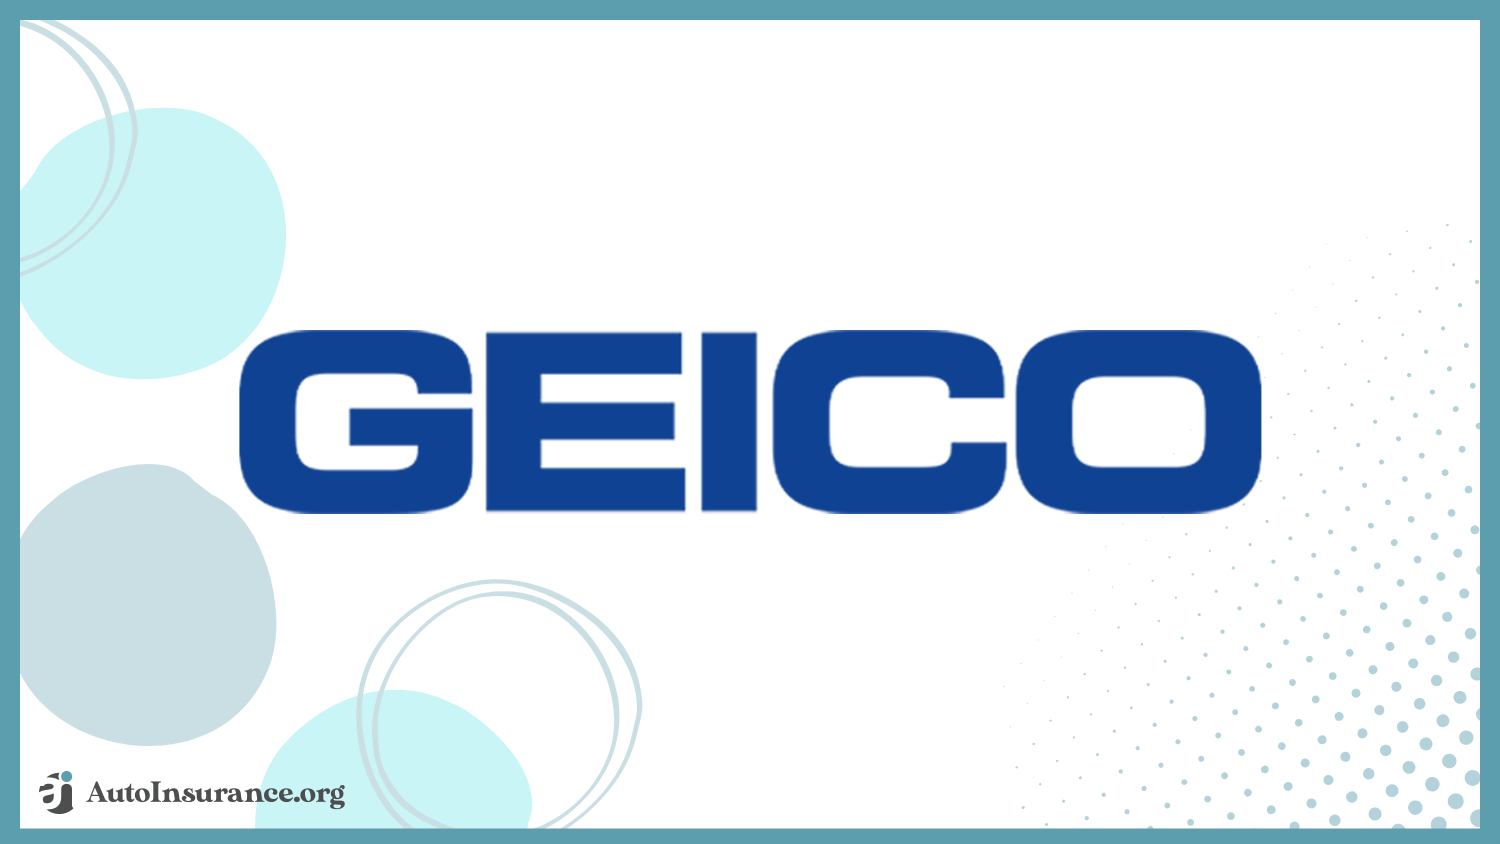 Geico: Best Auto Insurance for Military Families and Veterans